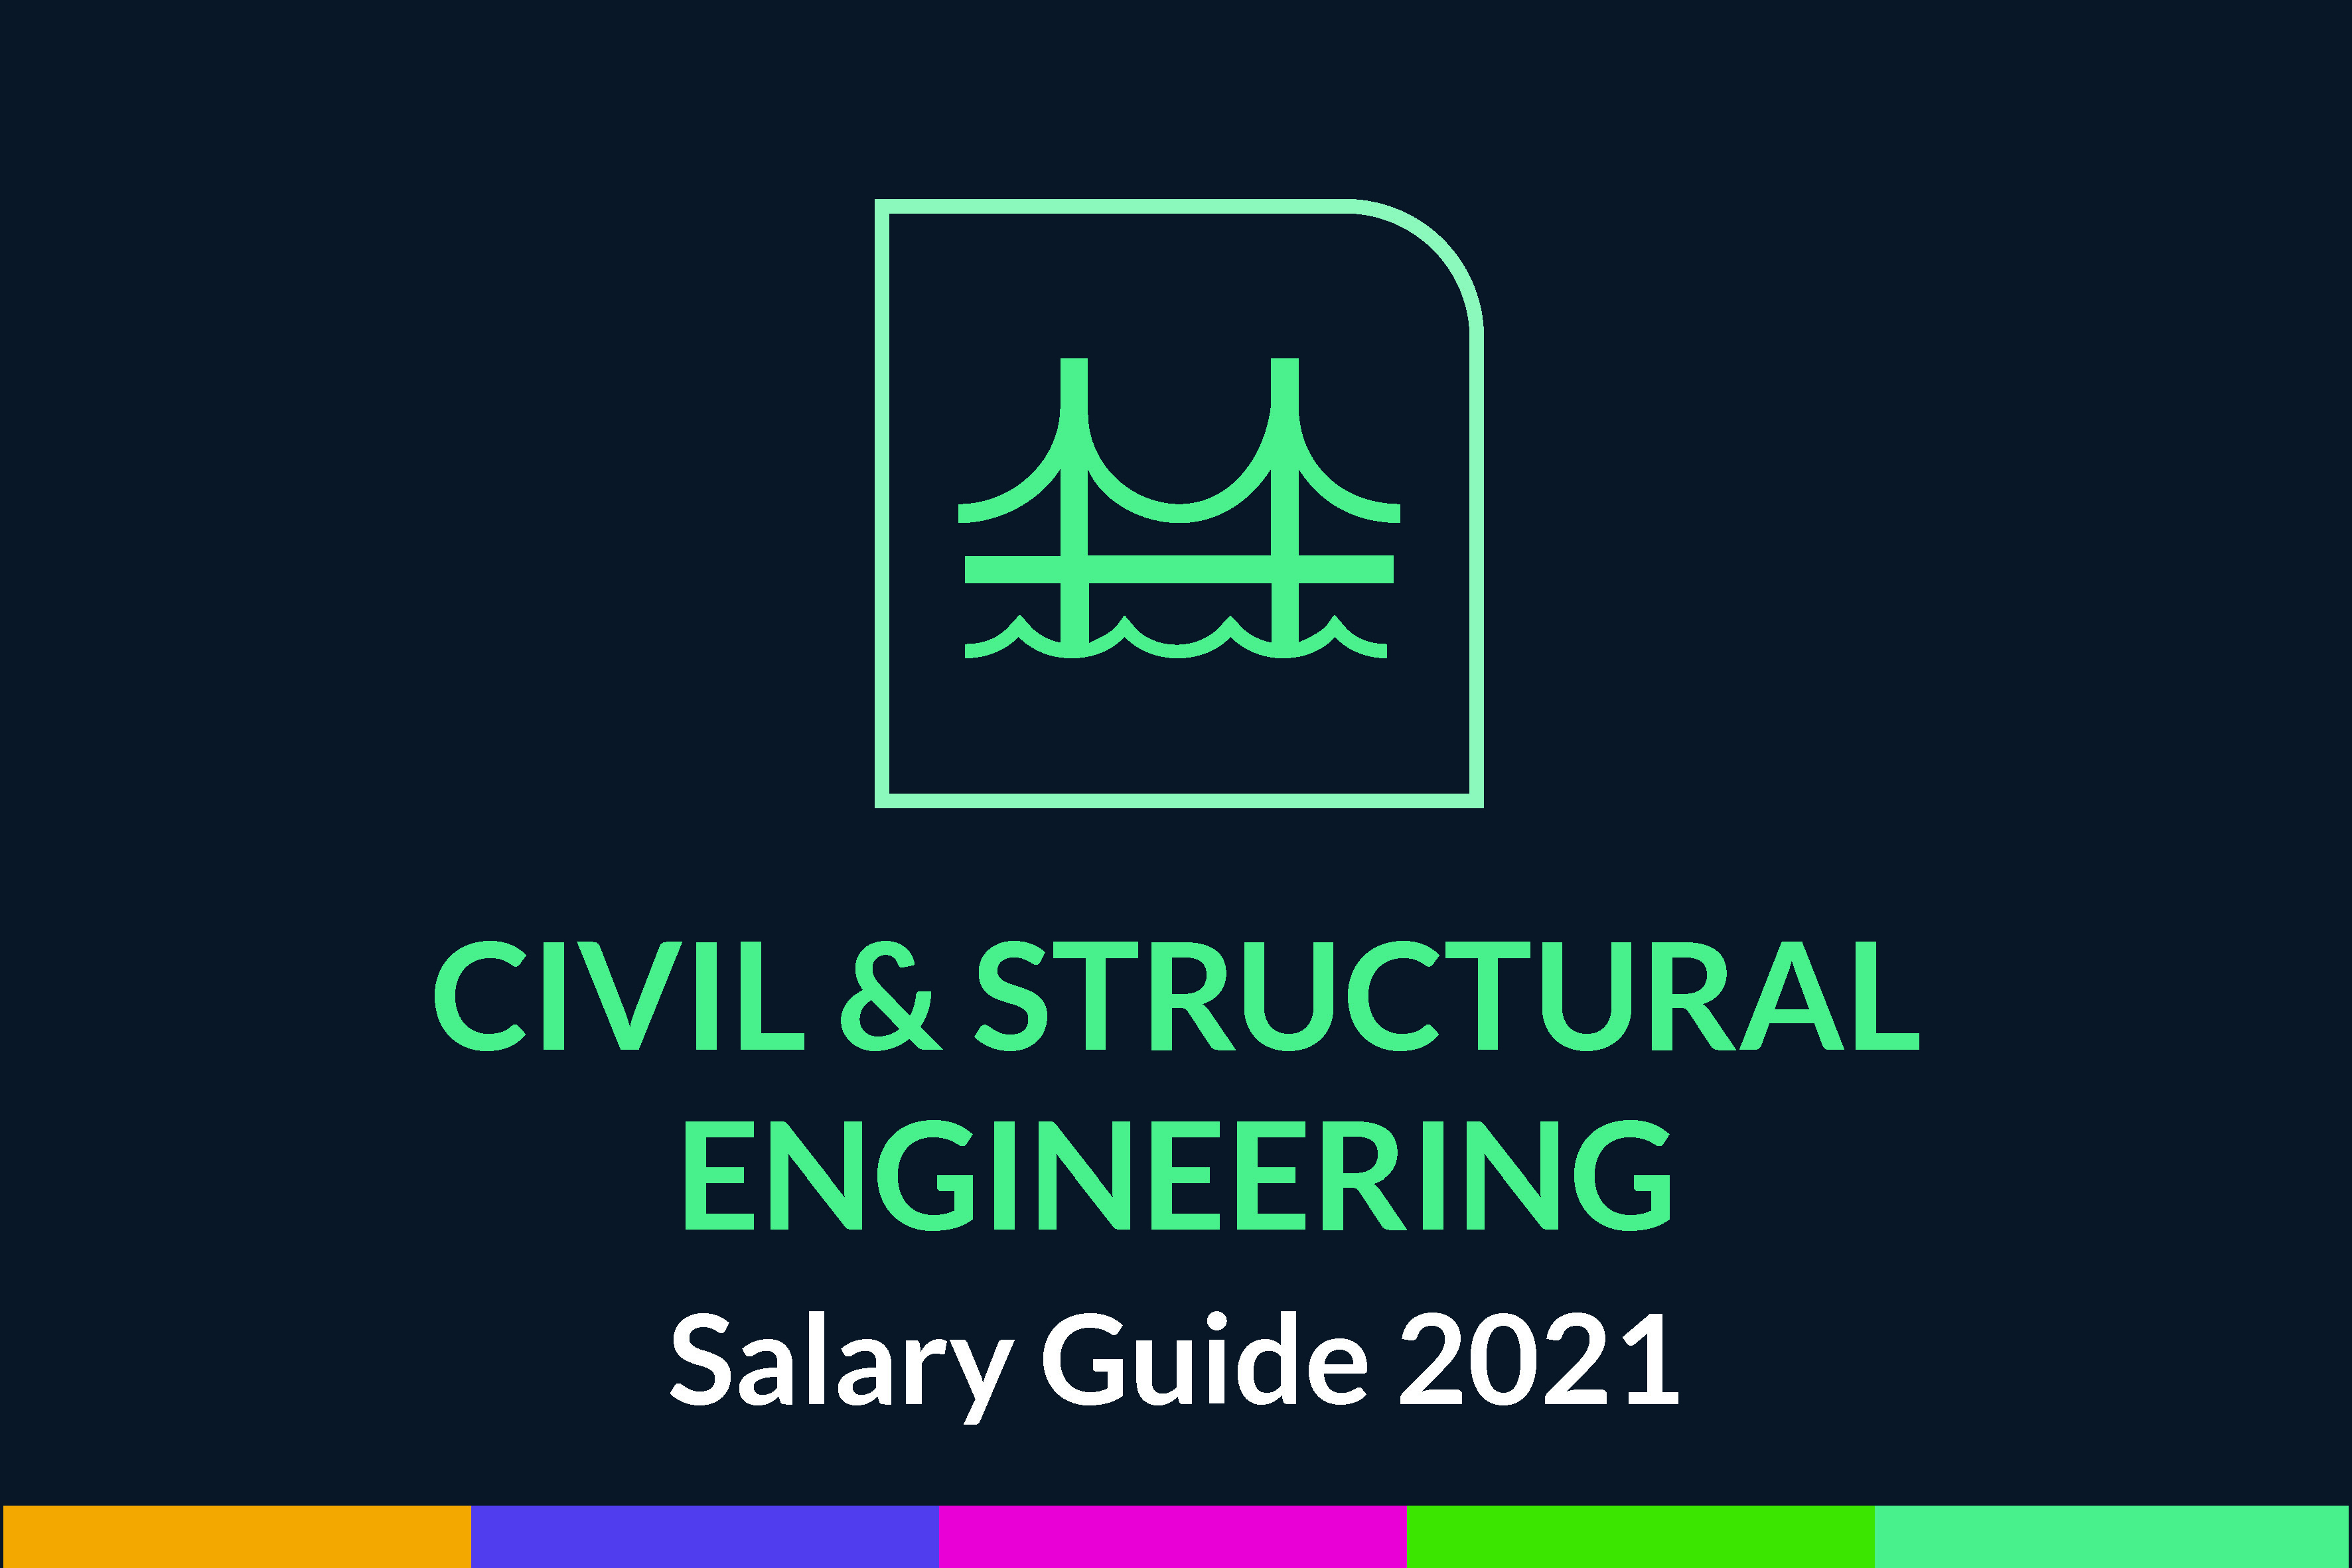 Civil & Structural Engineering Salary Guide